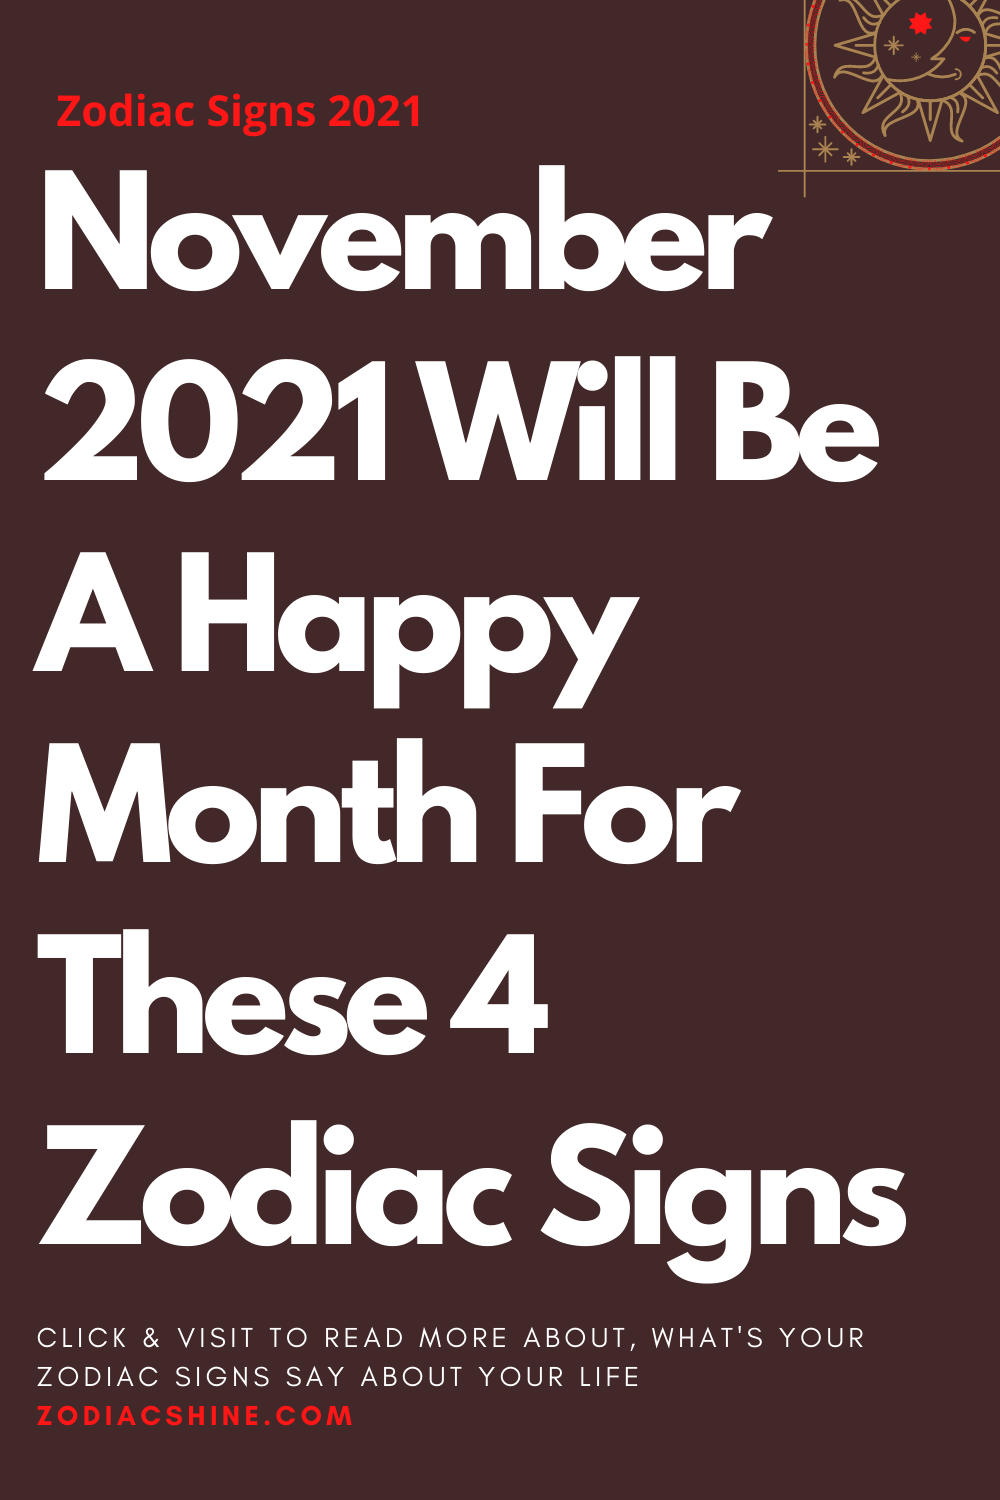 November 2021 Will Be A Happy Month For These 4 Zodiac Signs